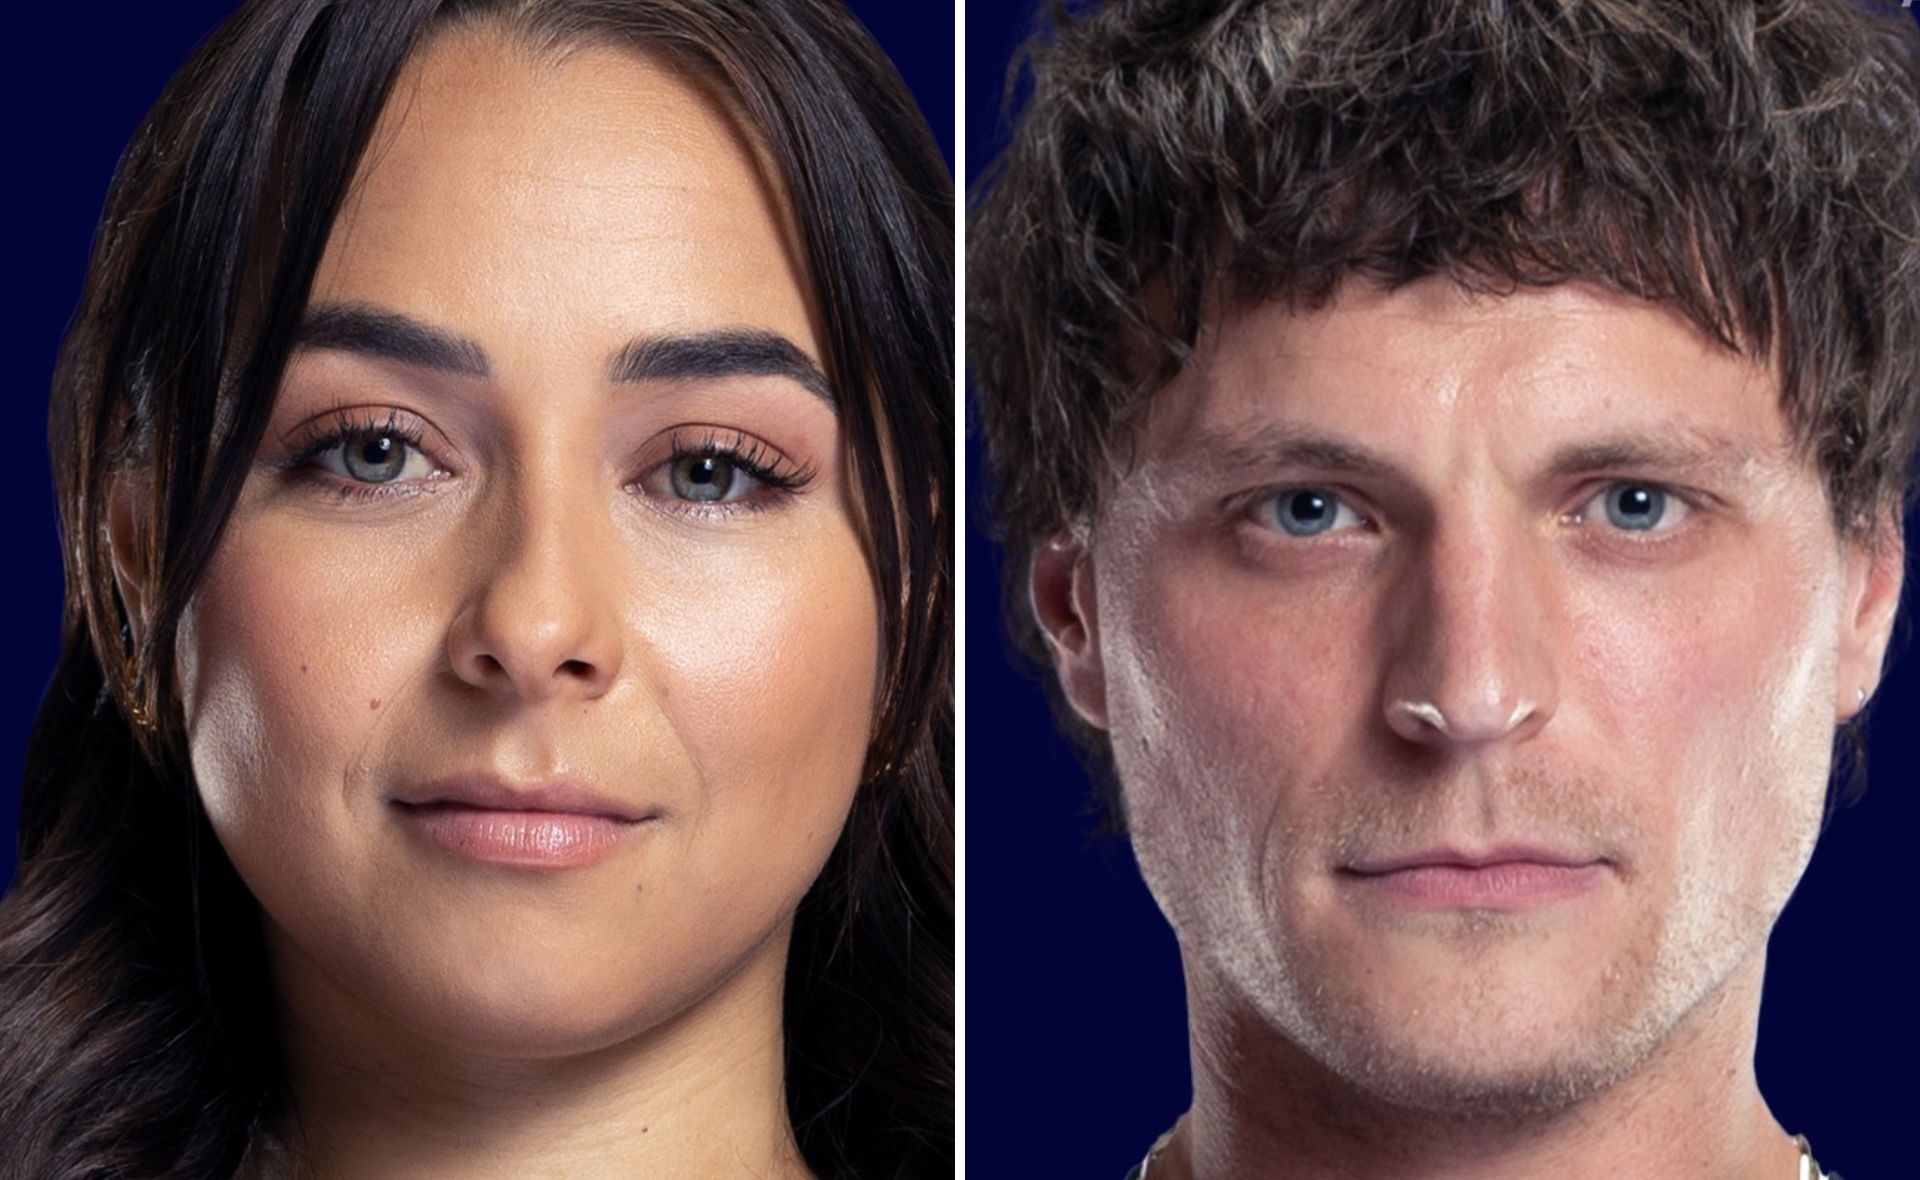 When is The Challenge Australia hitting screens? Here’s everything we know